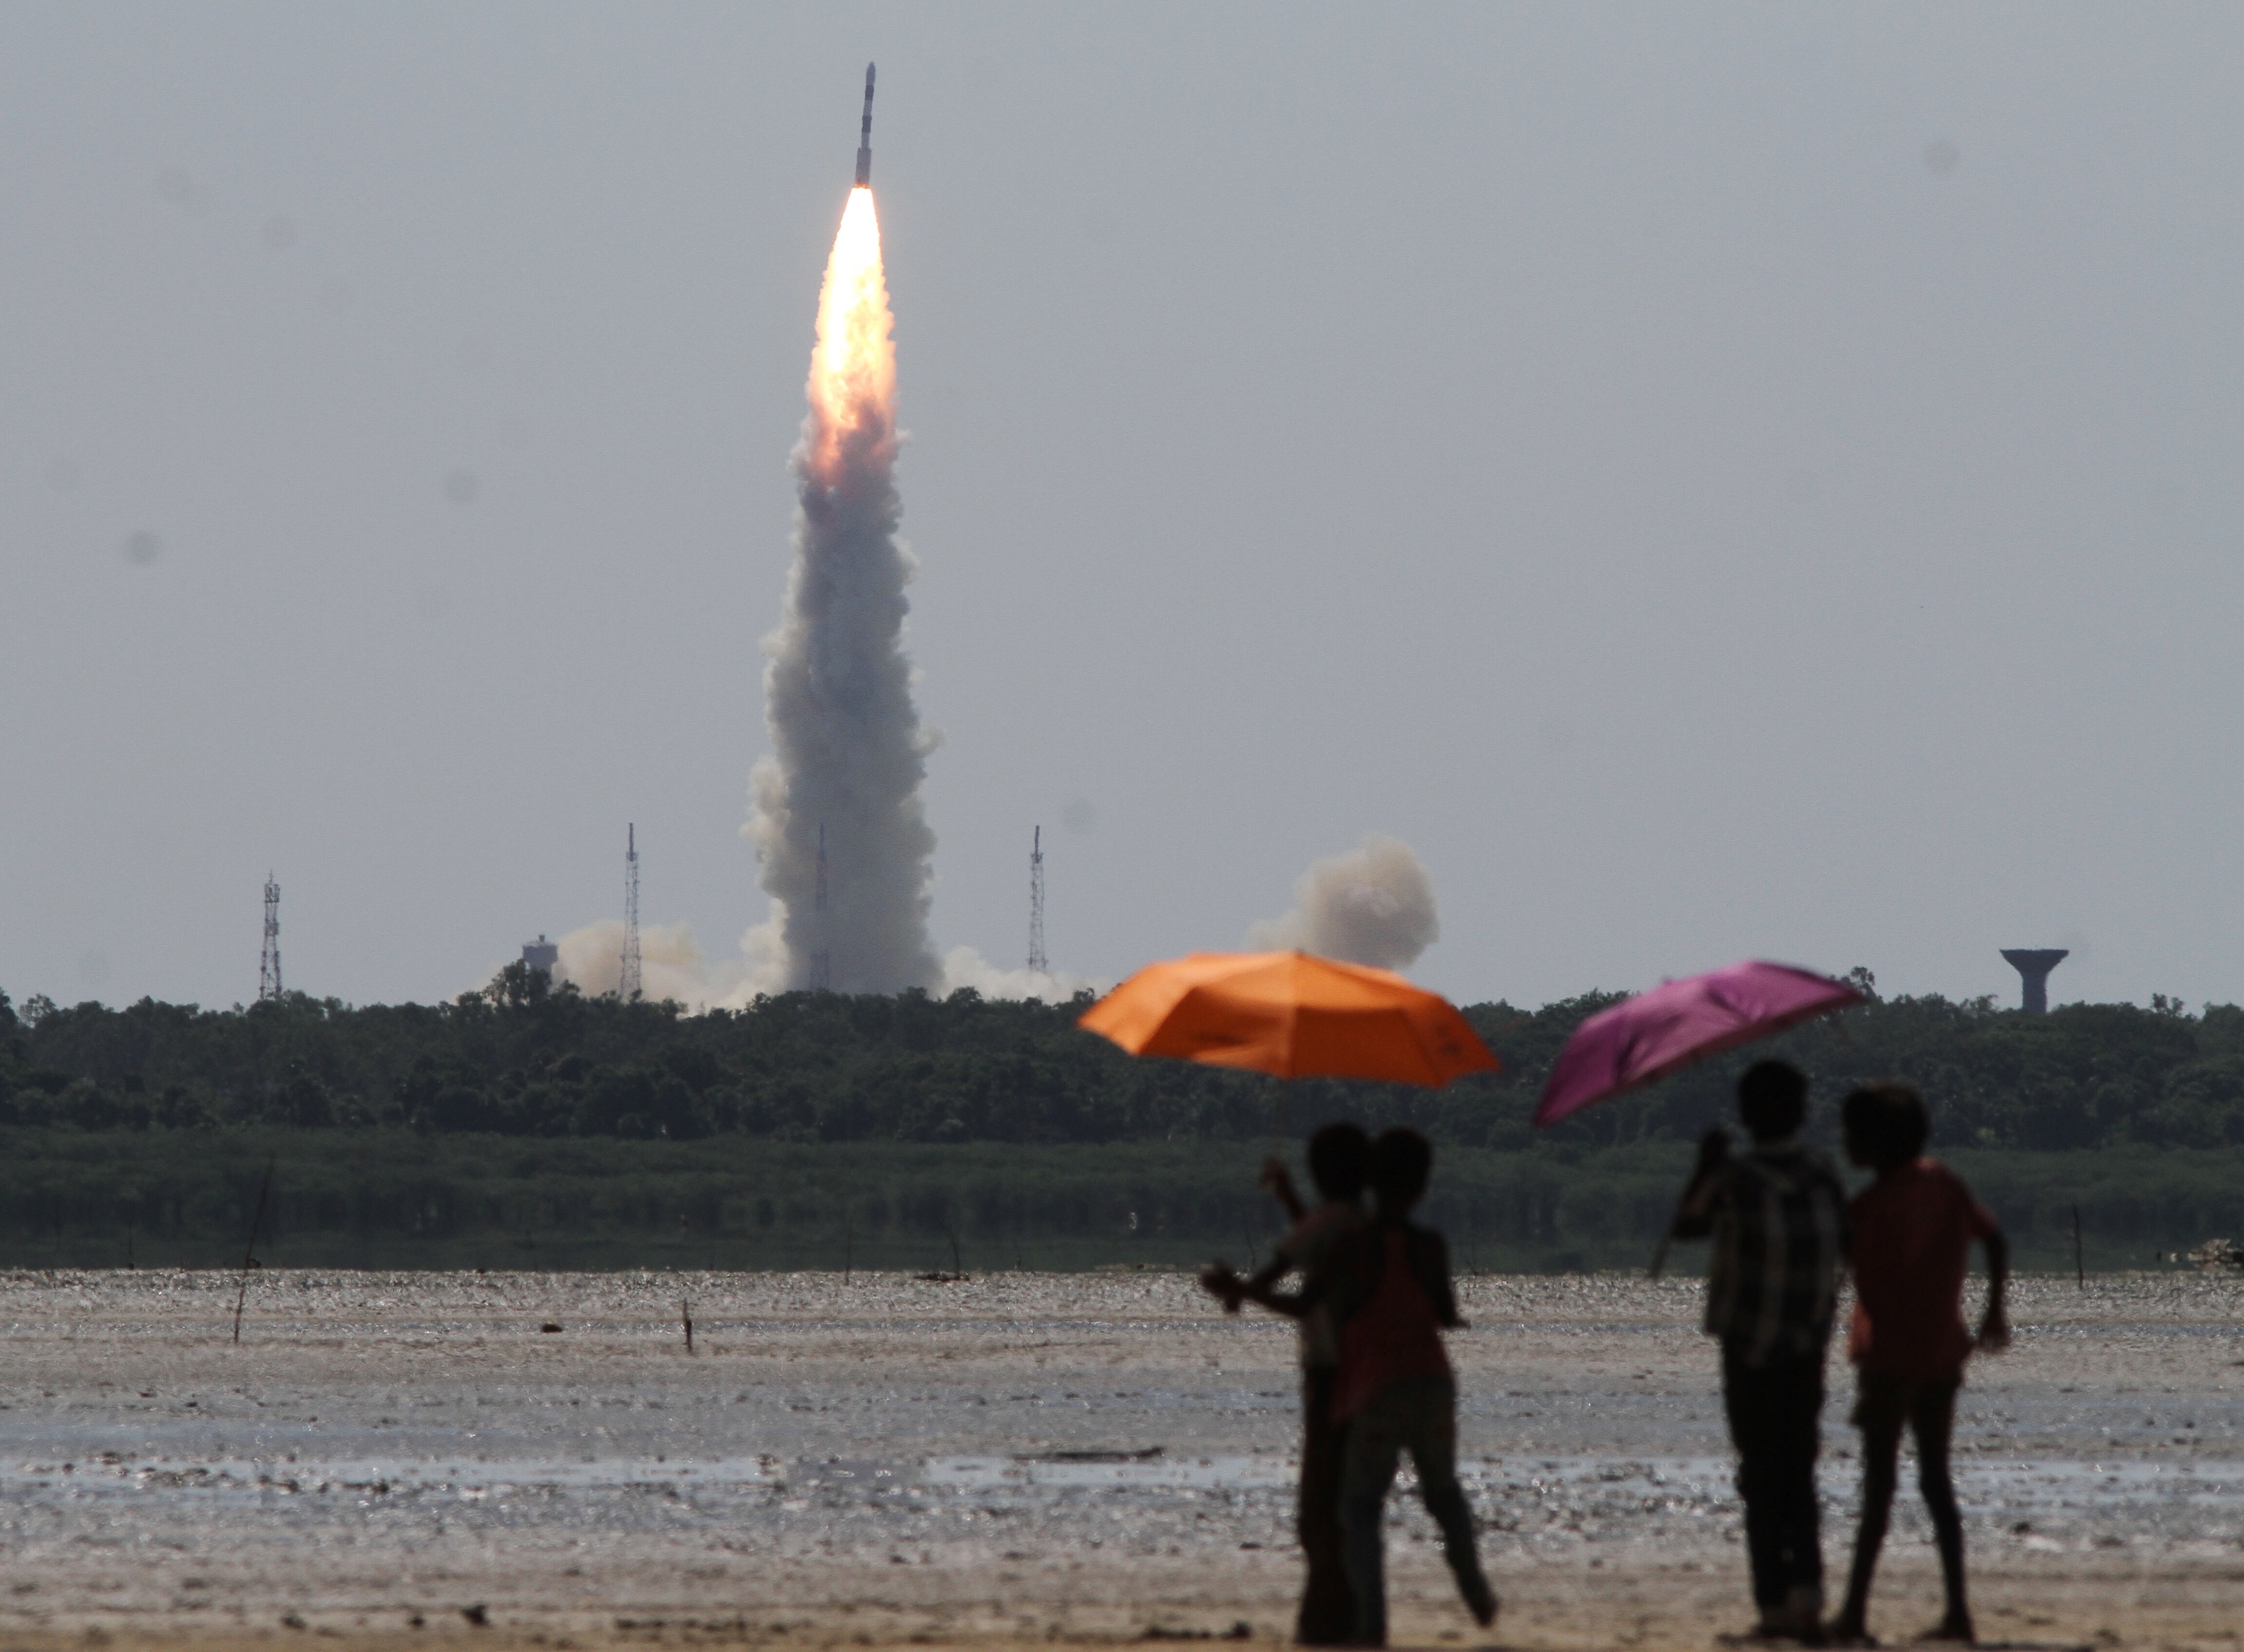 People watch the launch of Indian Space Research Organization's Polar Satellite Launch Vehicle (PSLV) carrying the satellites in Sriharikota, Indian state of Andhra Pradesh, June 22, 2016. 